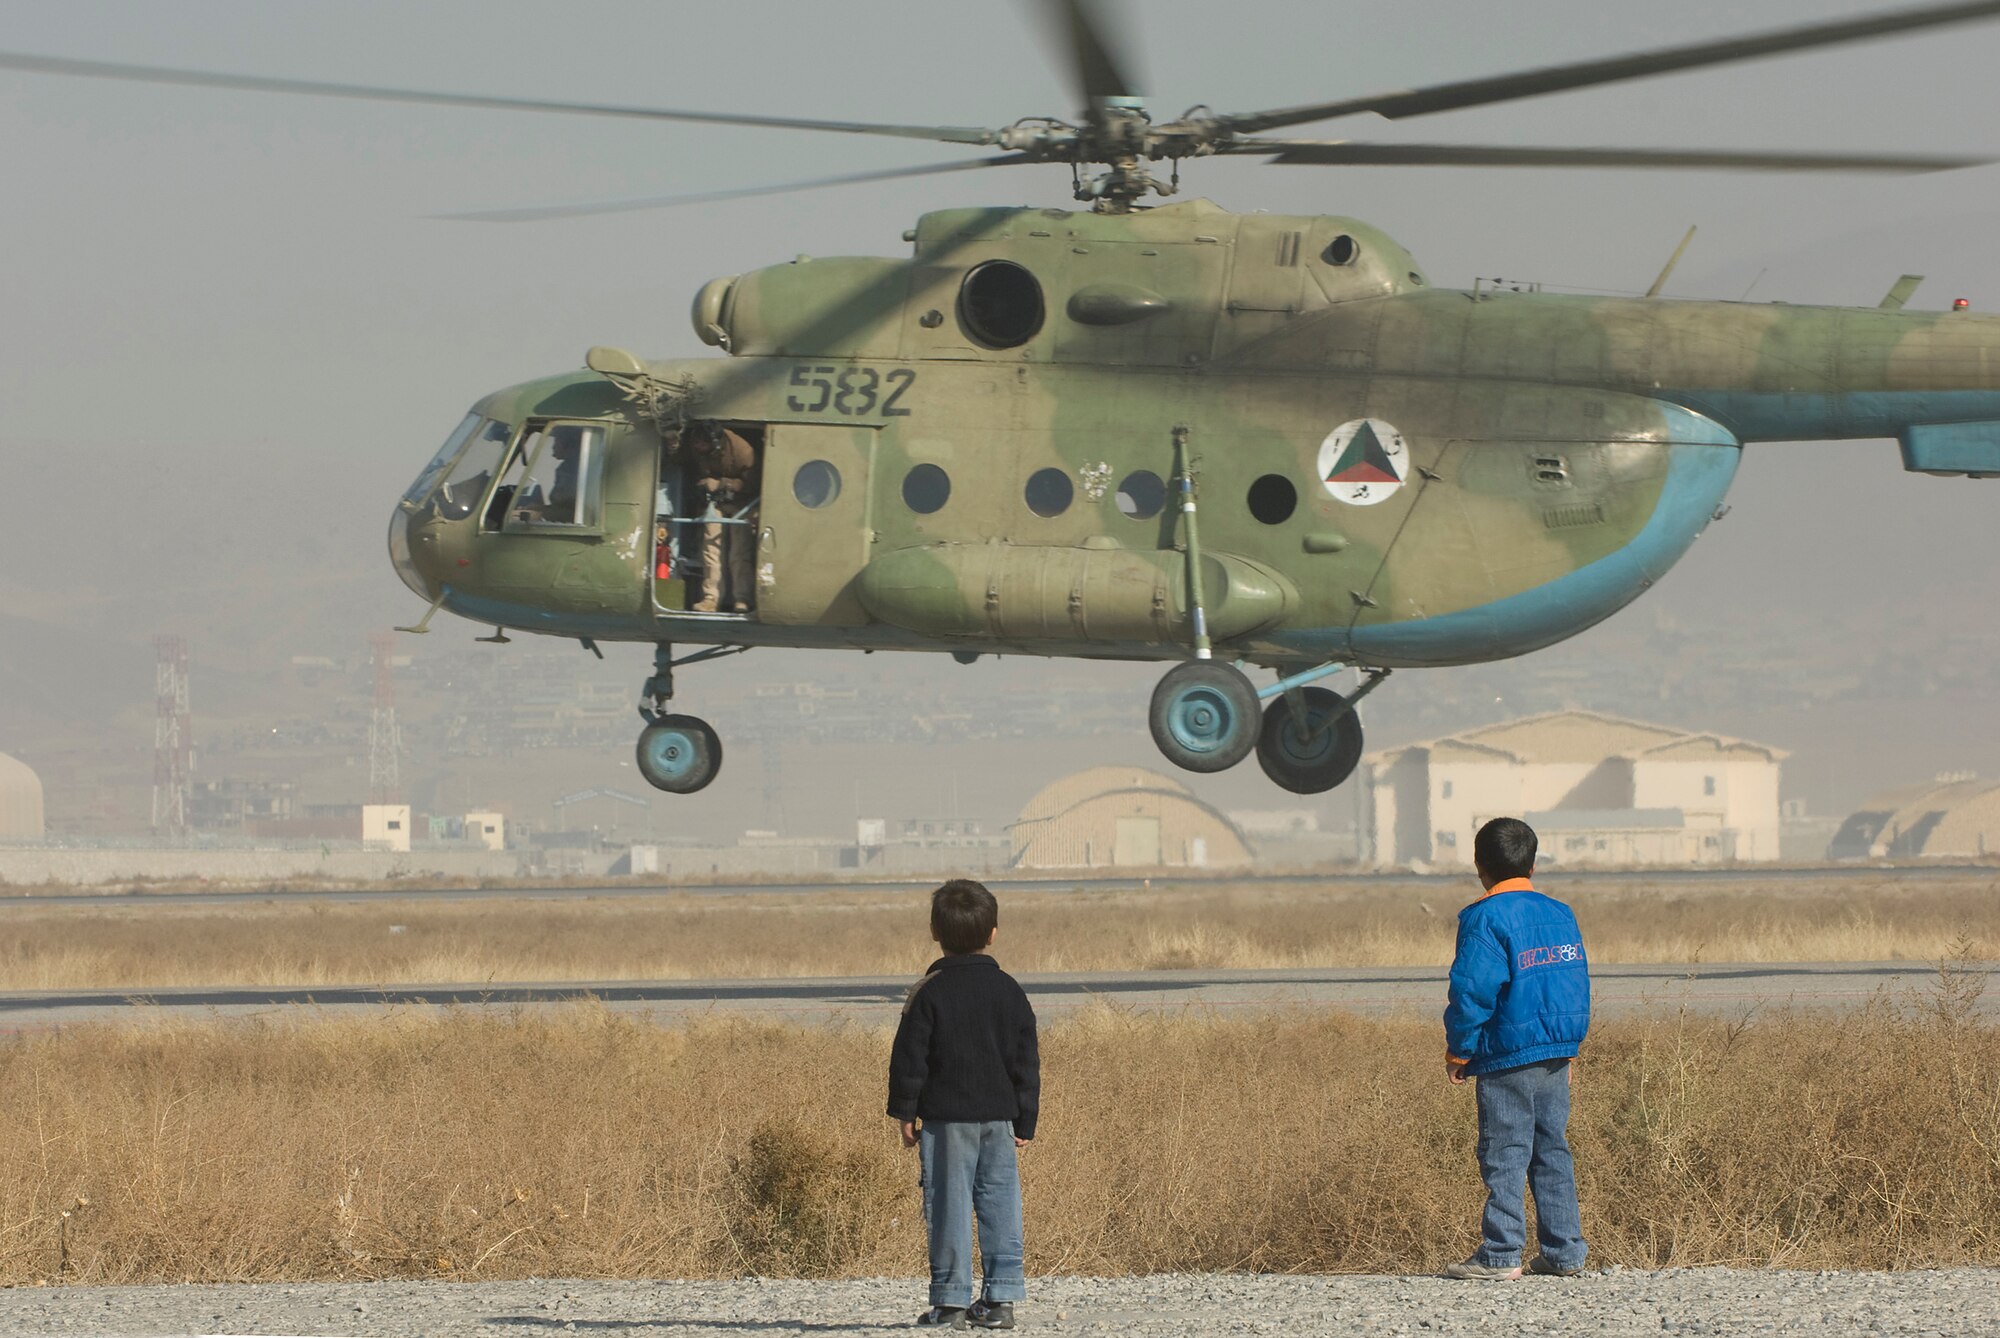 KABUL, Afghanistan -- Two Afghan boys watch as an Afghan National Army Air Corps Mi-17 takes off here. The ANAAC is mentored by the 438th Air Expeditionary Wing. U.S. Air Force helicopter pilots regularly fly with the Afghan crews as instructor pilots on the Soviet made aircraft. (U.S. Air Force photo/Master Sgt. Keith Brown)